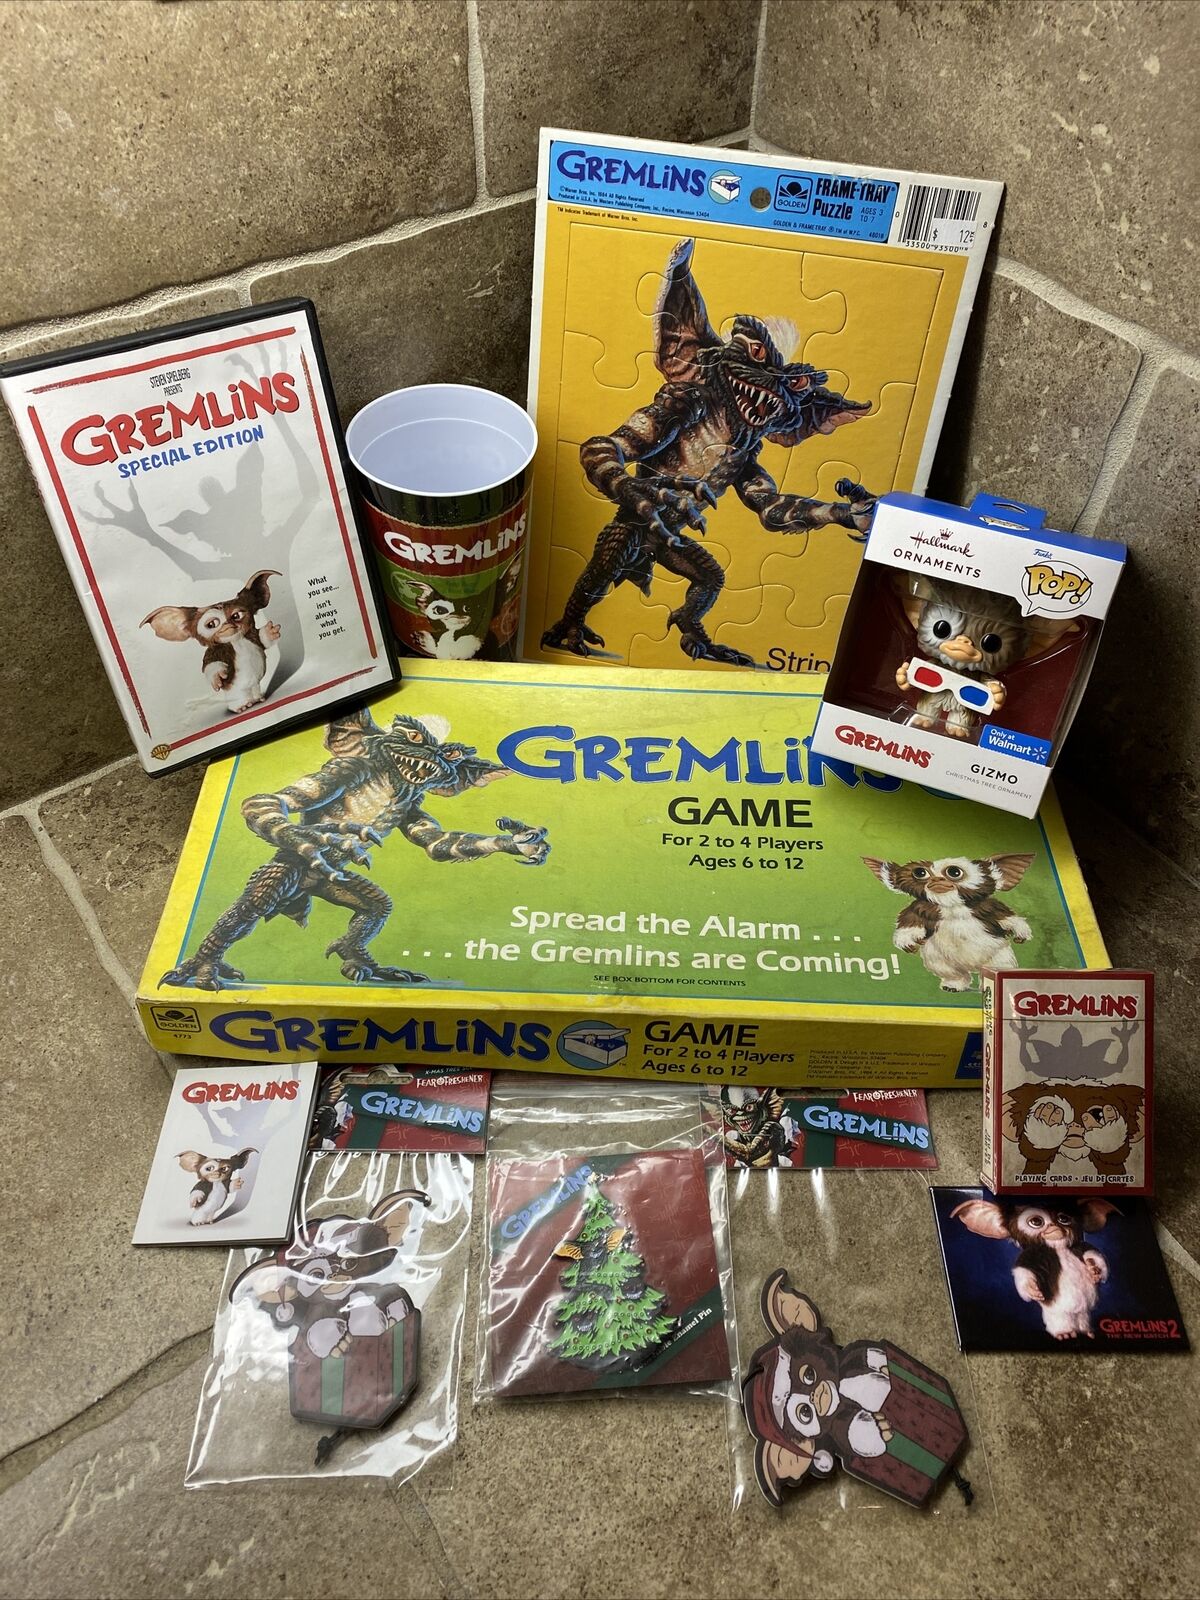 LOT OF Gremlins Collectibles Board Game, Cards, Figure, Air Fresheners, DVD